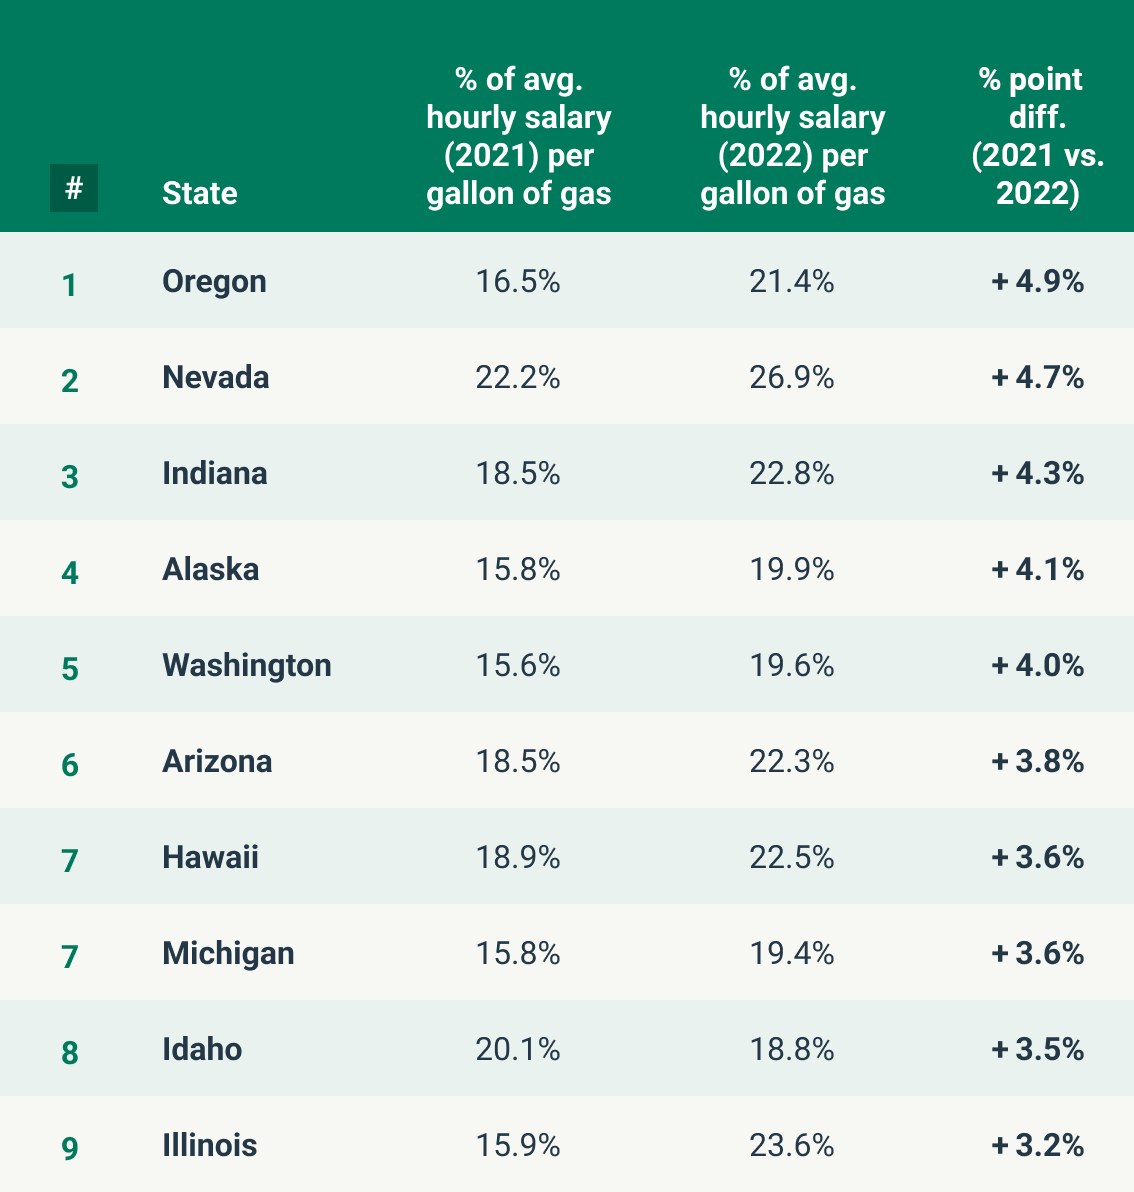 chart depicting the states with biggest year-on-year changes in gas affordability, with Oregon seeing the largest increase in 2021 vs. 2022